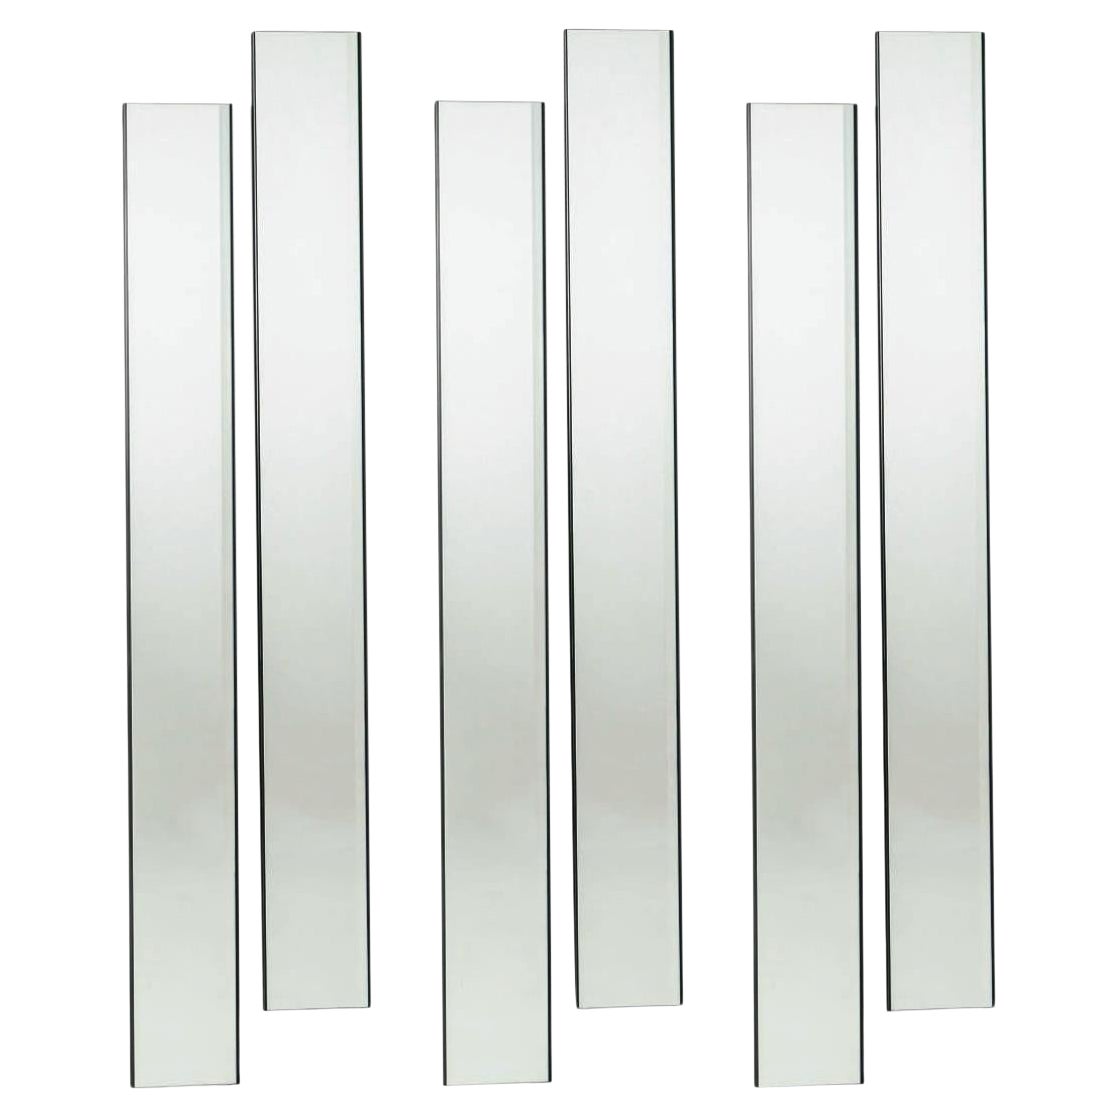 Set of 10 Otero Mirrors by Studio Simon Gavina, Italy 1980s (First Edition) For Sale